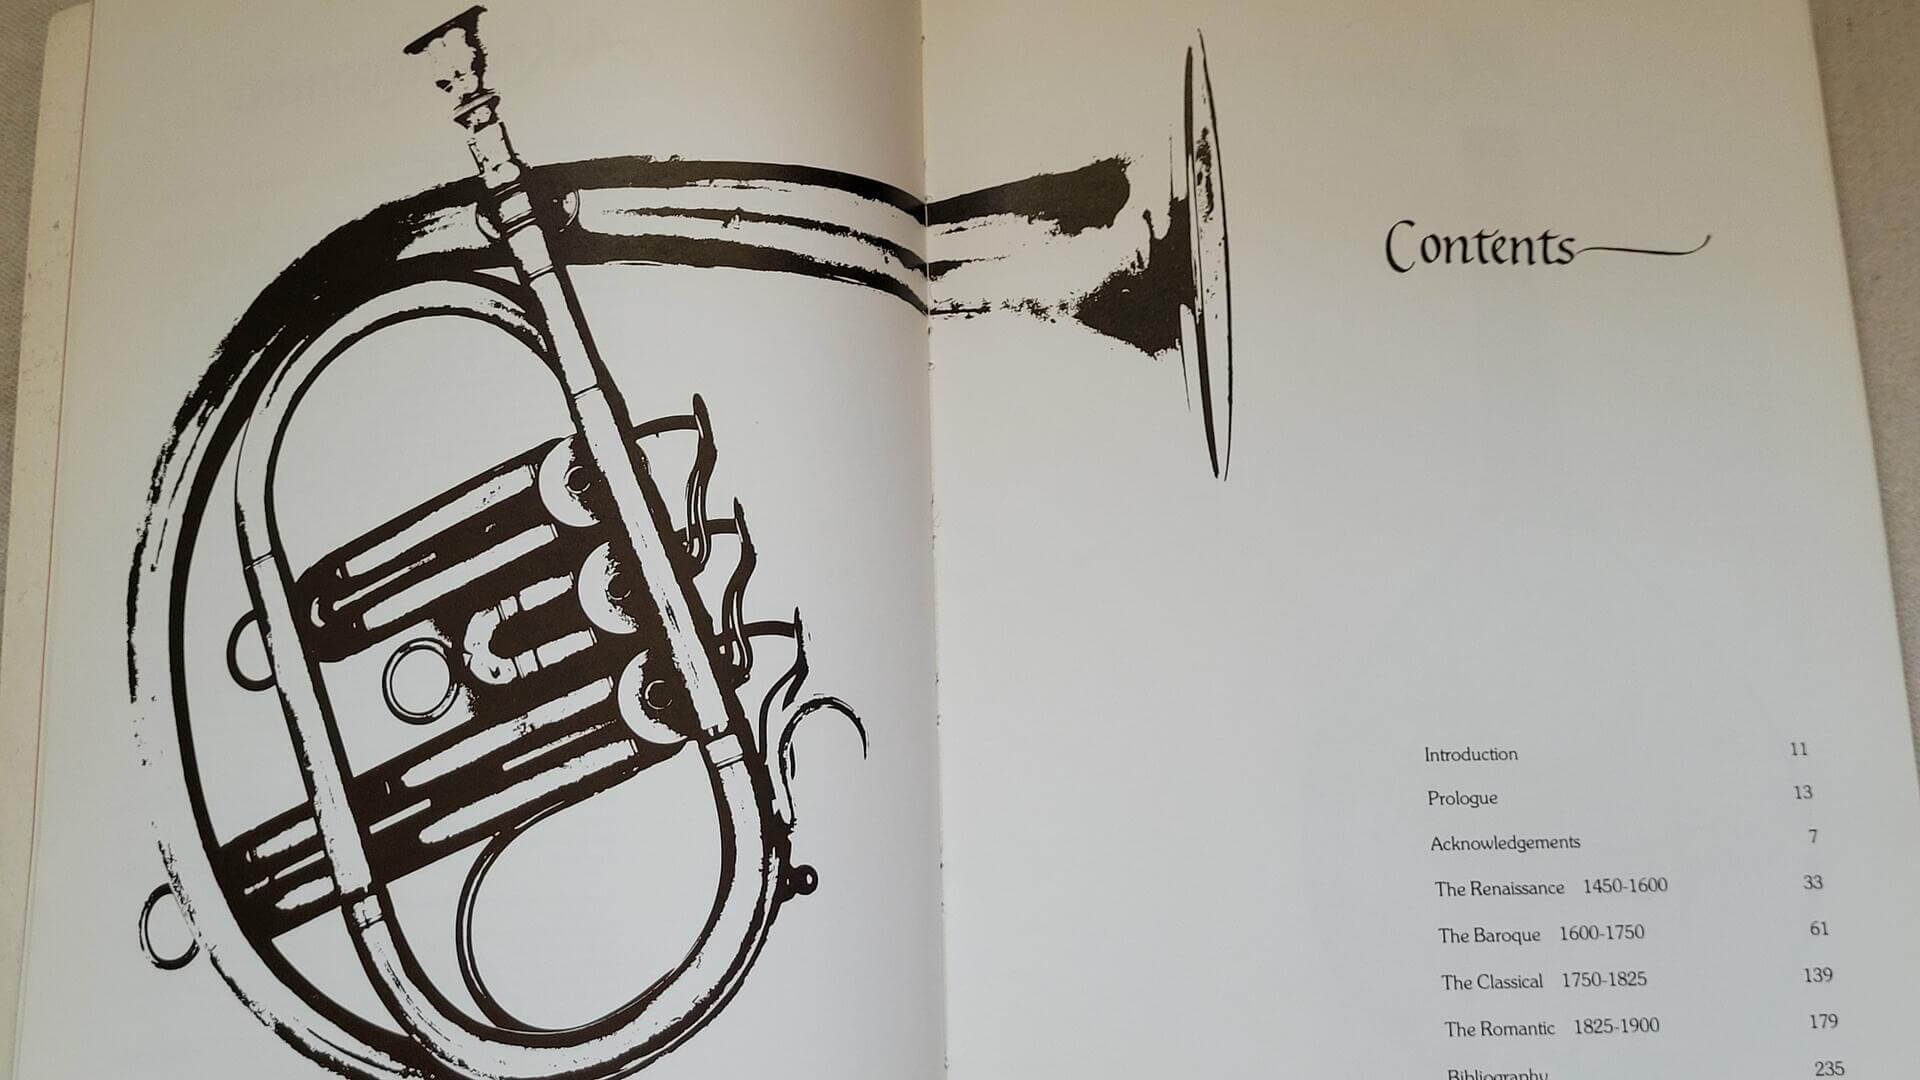 The Look of Music: Rare Musical Instruments 1500-1900 book by Phillip T Young, published 1980 by - Vancouver Museum & Planetarium Association Vancouver. Excellent antique reference with photos of rare musical instruments in museum collections